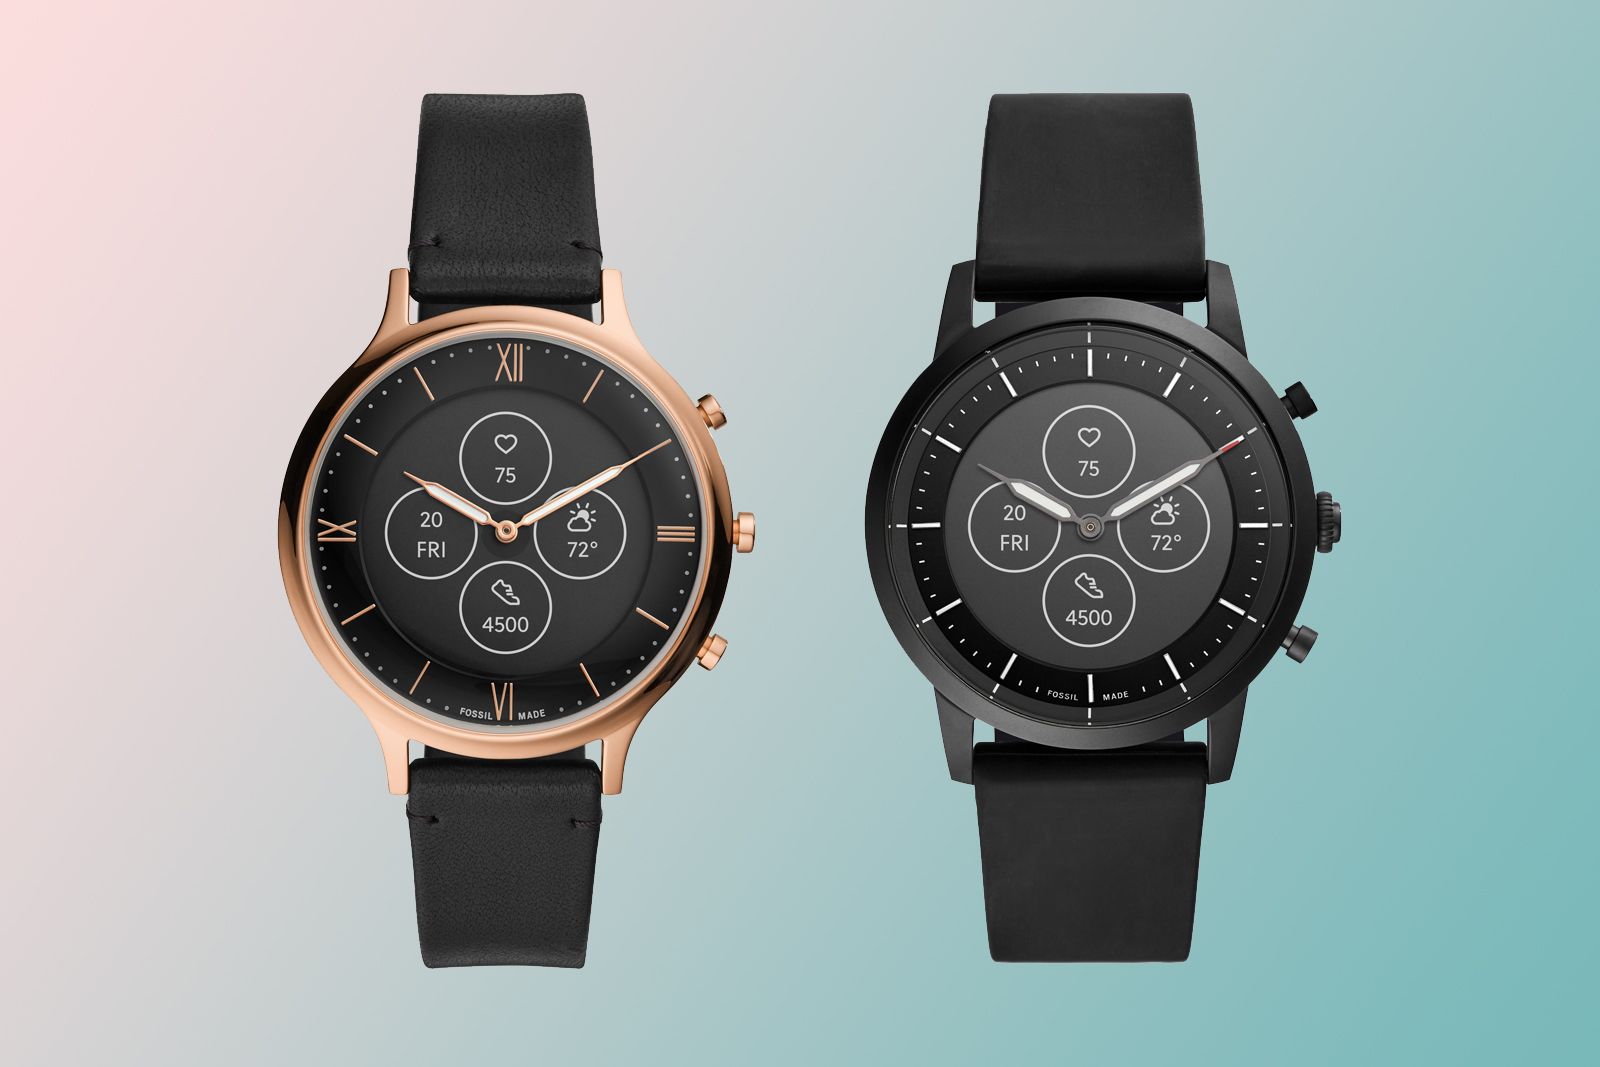 Fossil Hybrid HR features traditional watch style with smartwatch functionality image 1